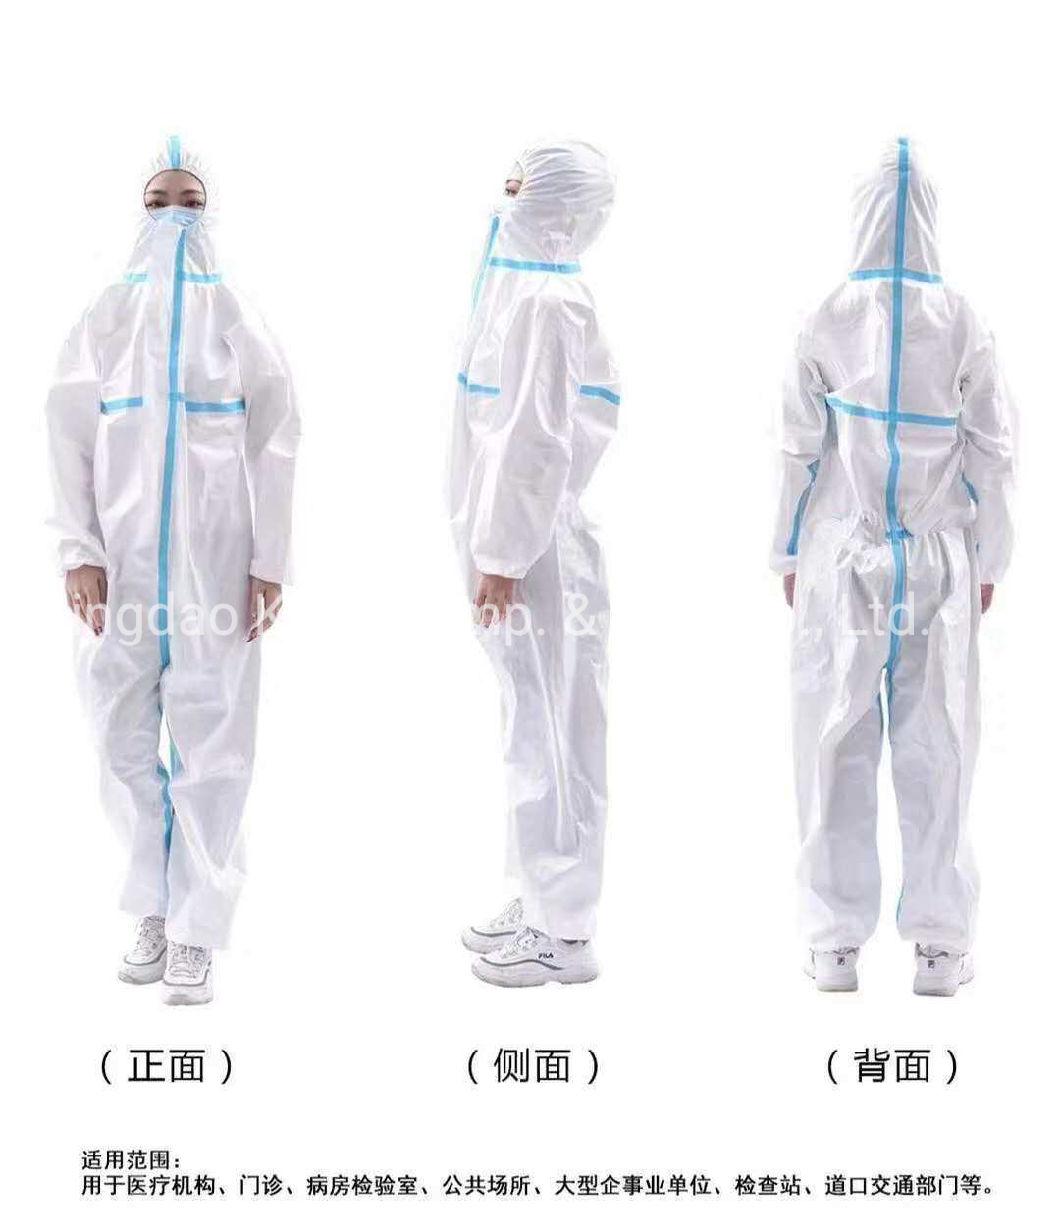 Yellow PP Safety Clothing Civil Use Disposable Isolation Gown